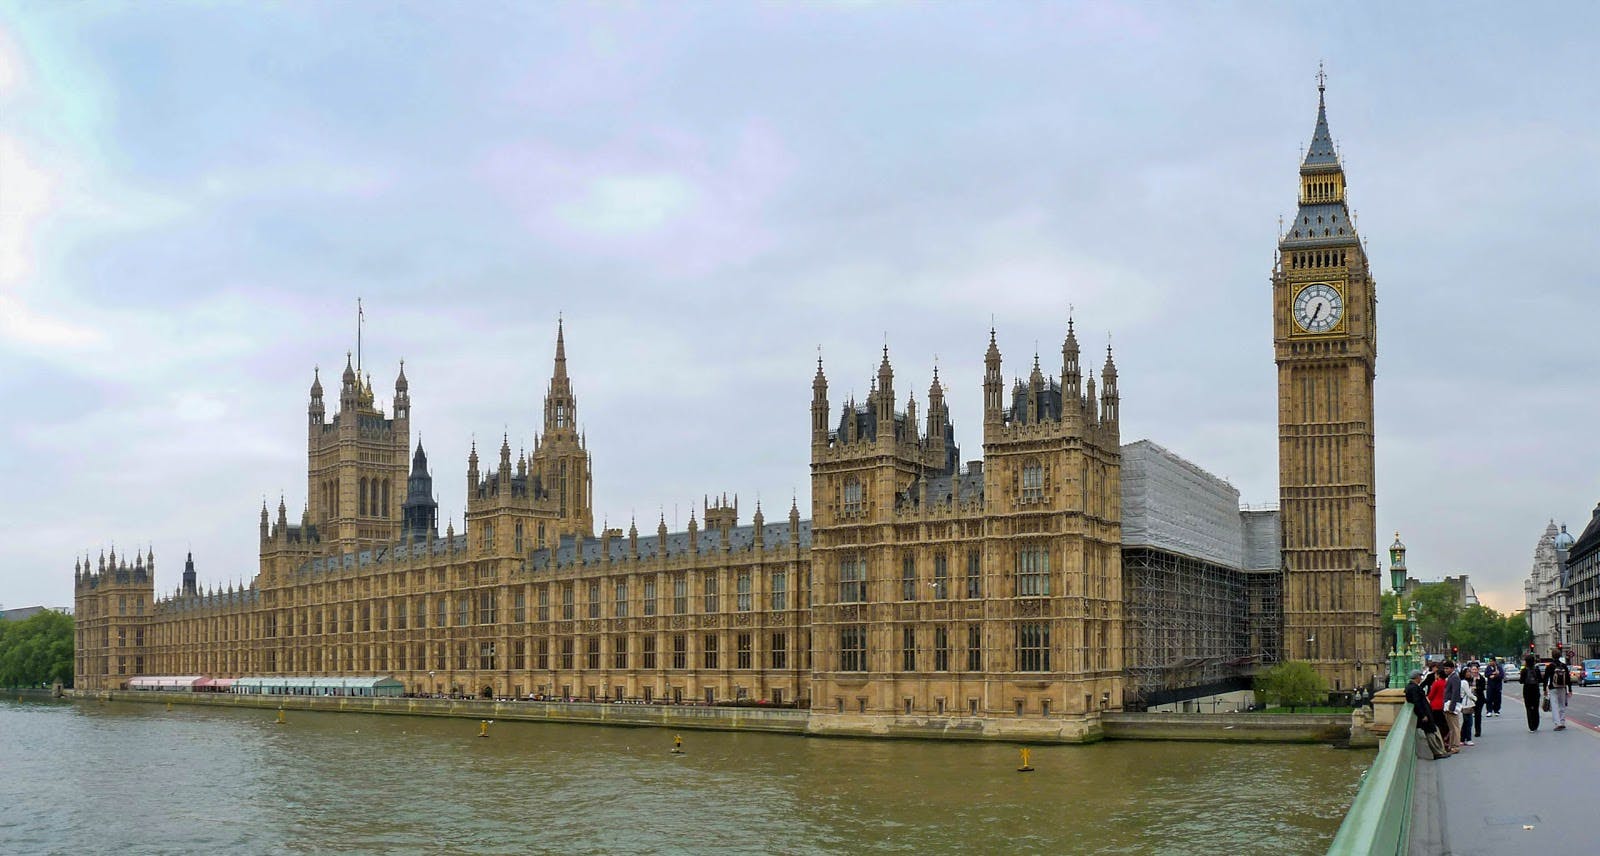 Image - Palace of Westminster